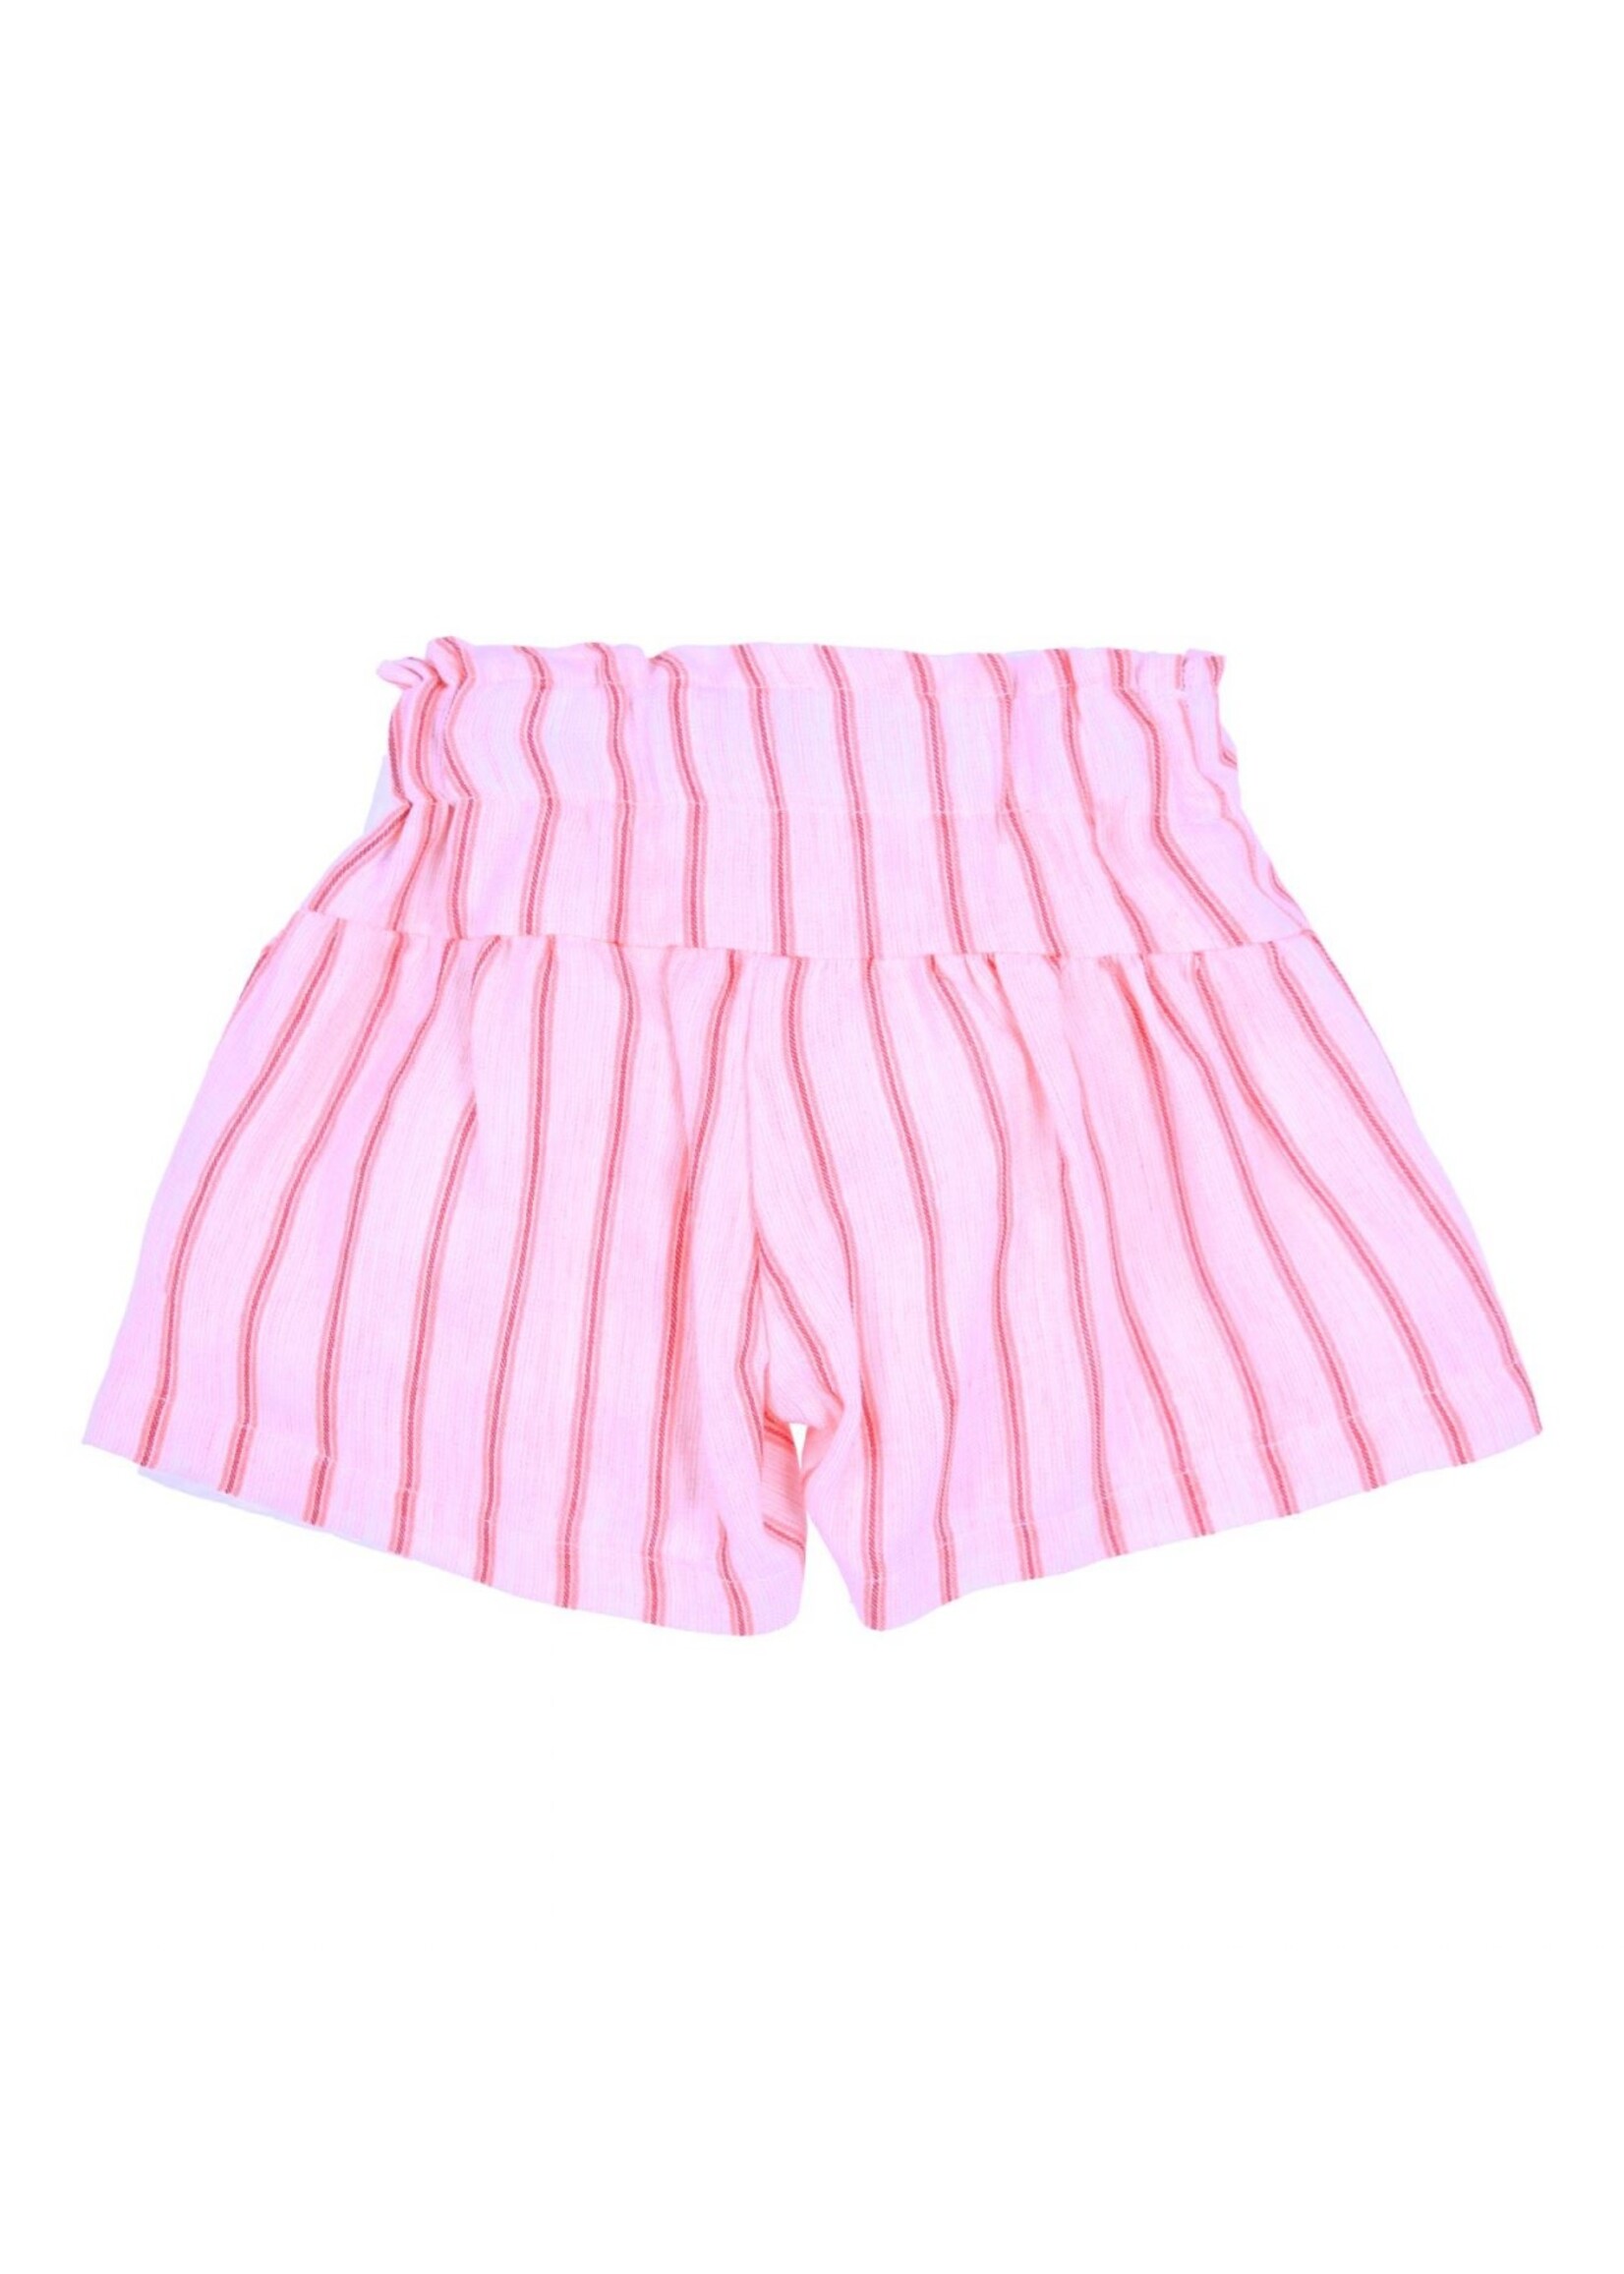 Gymp Short Pink - Gymp